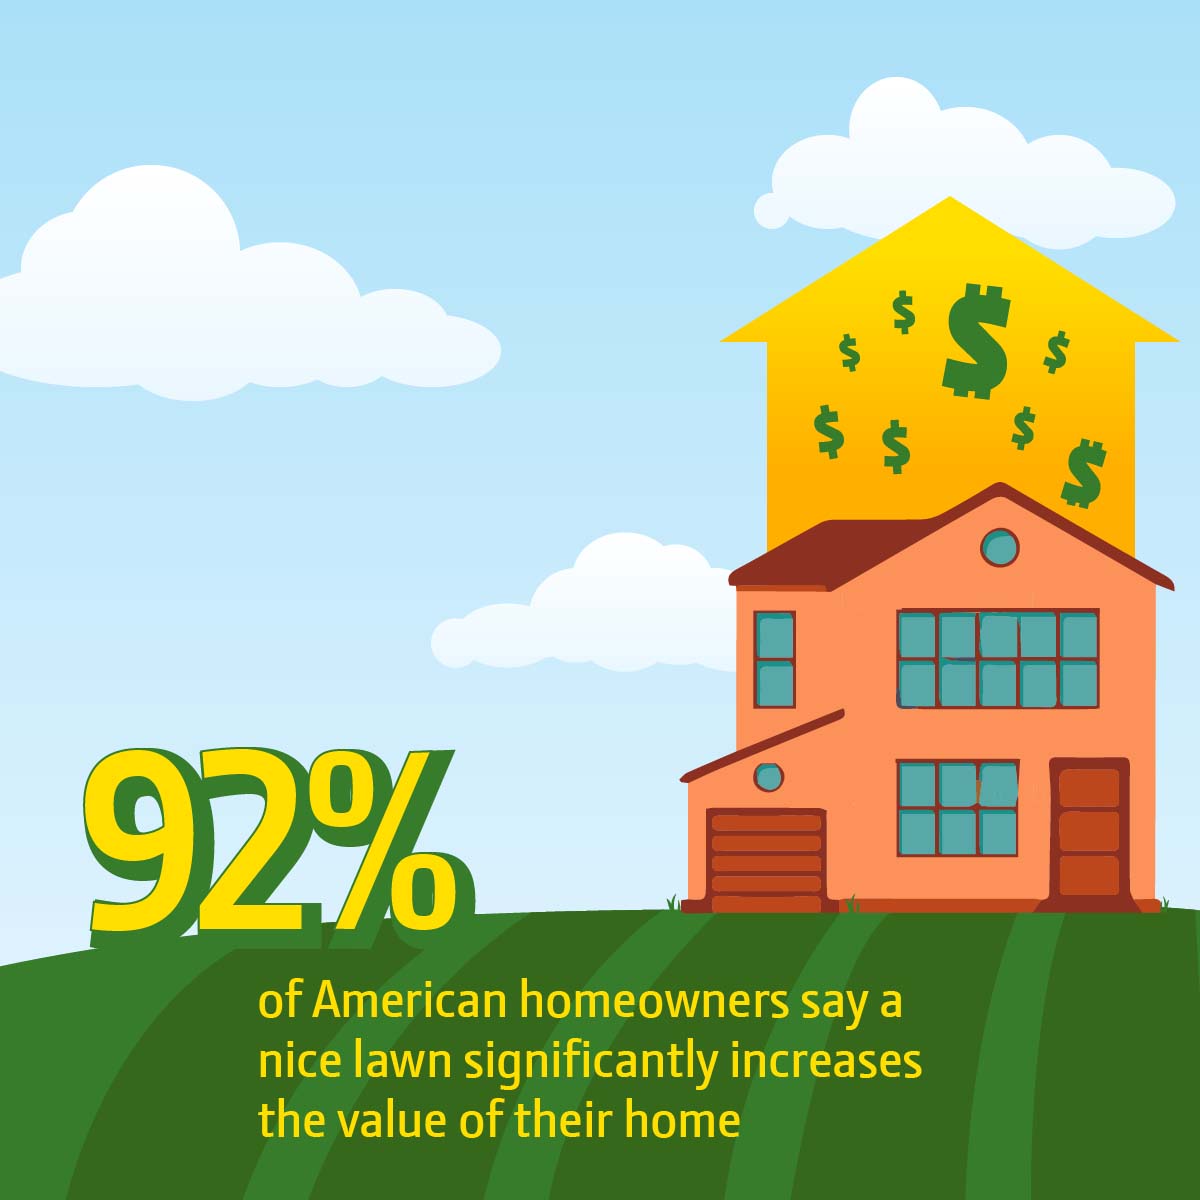 The survey from John Deere reveals most American homeowners believe proper lawn maintenance increases the value of their homes.